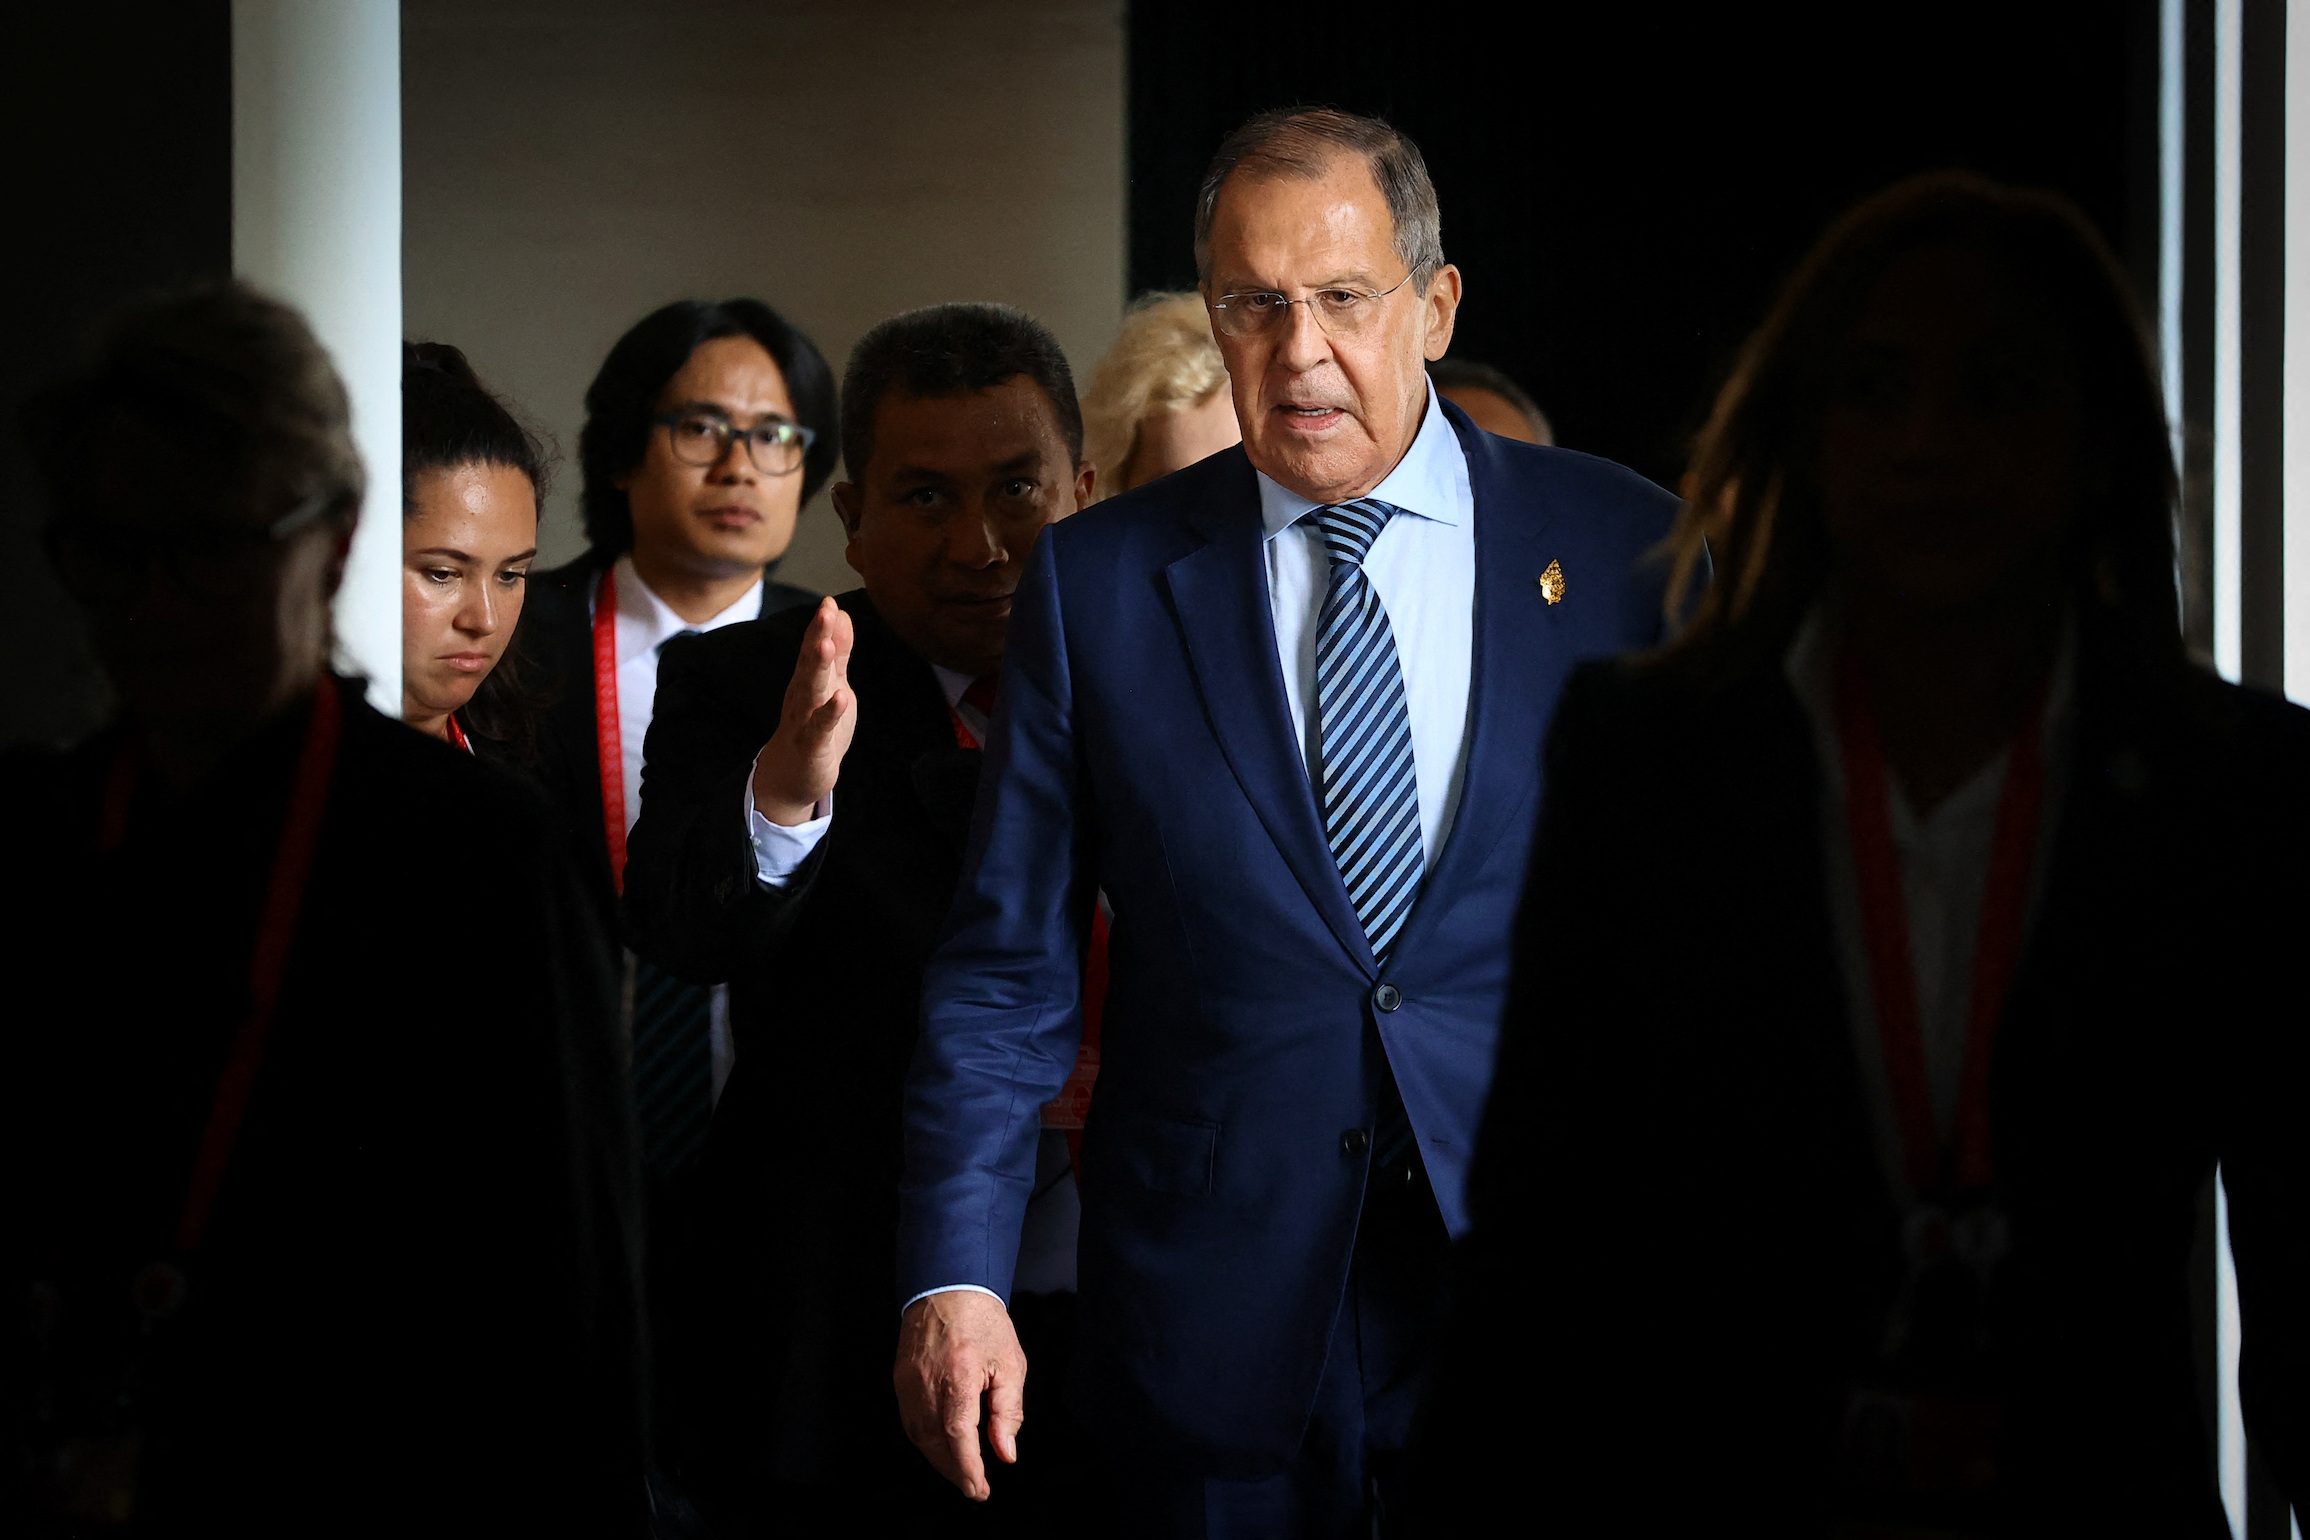 Russia’s Lavrov: Military confrontation between nuclear powers must be avoided